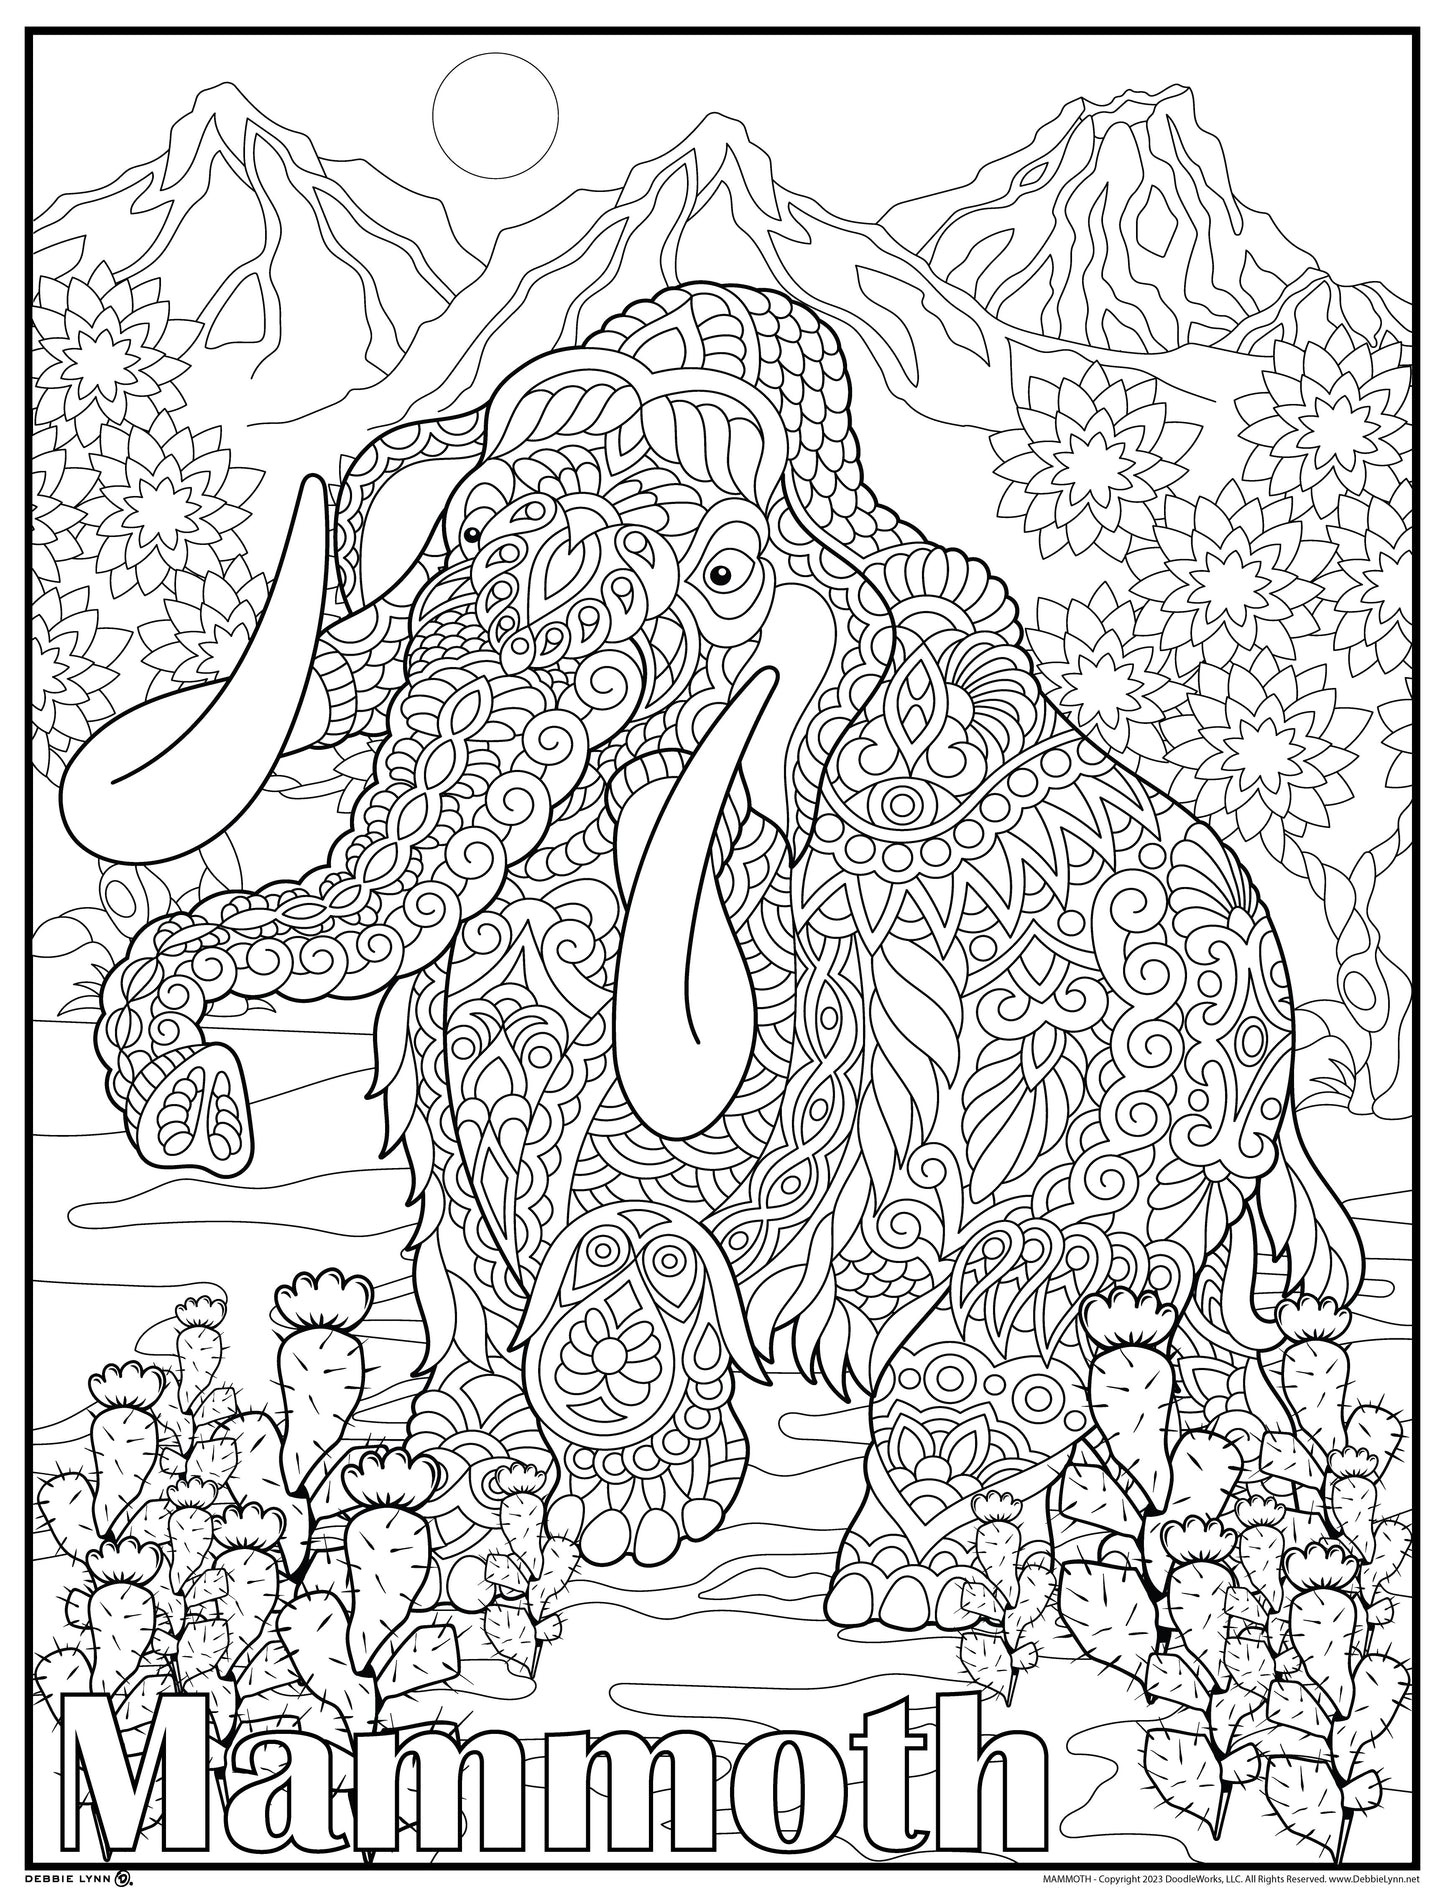 Mammoth Dinosaur Personalized Giant Coloring Poster 46"x60"